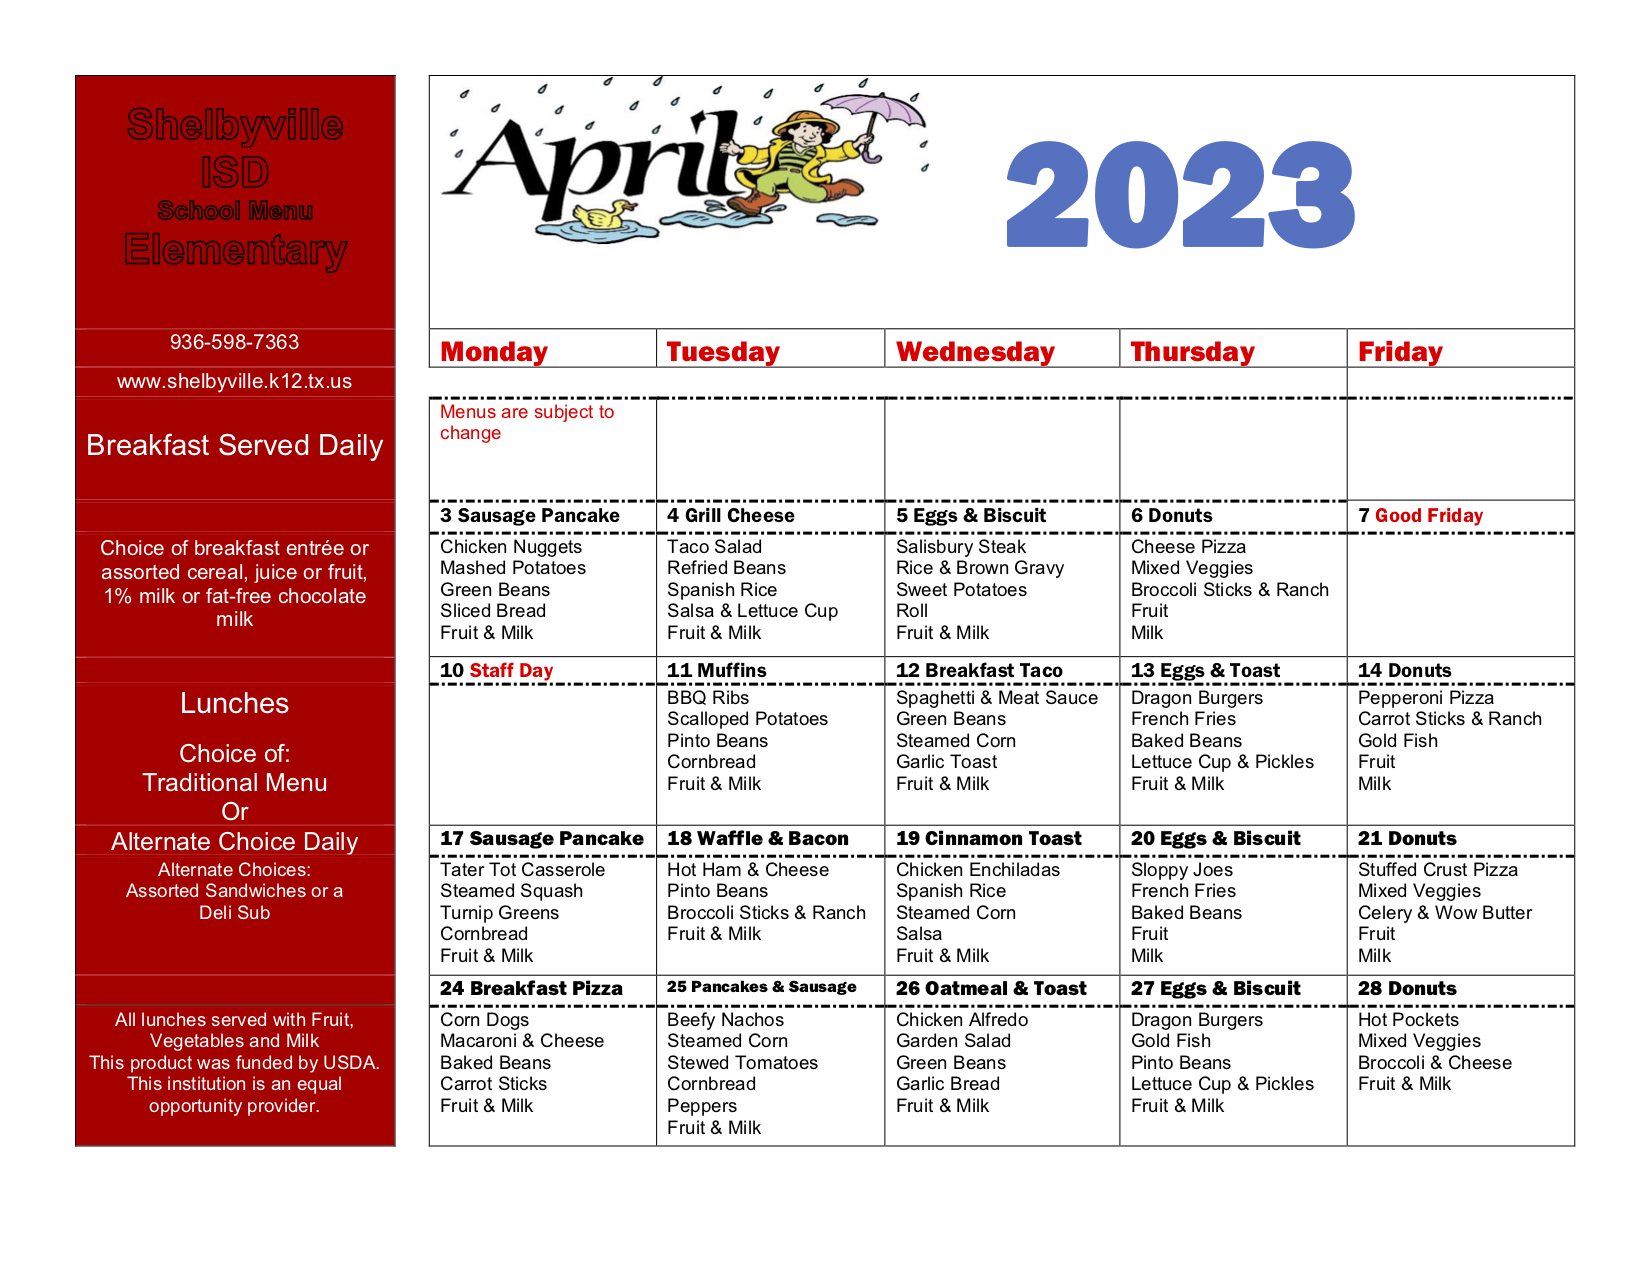 Shelbyville's breakfast and lunch menus for April.